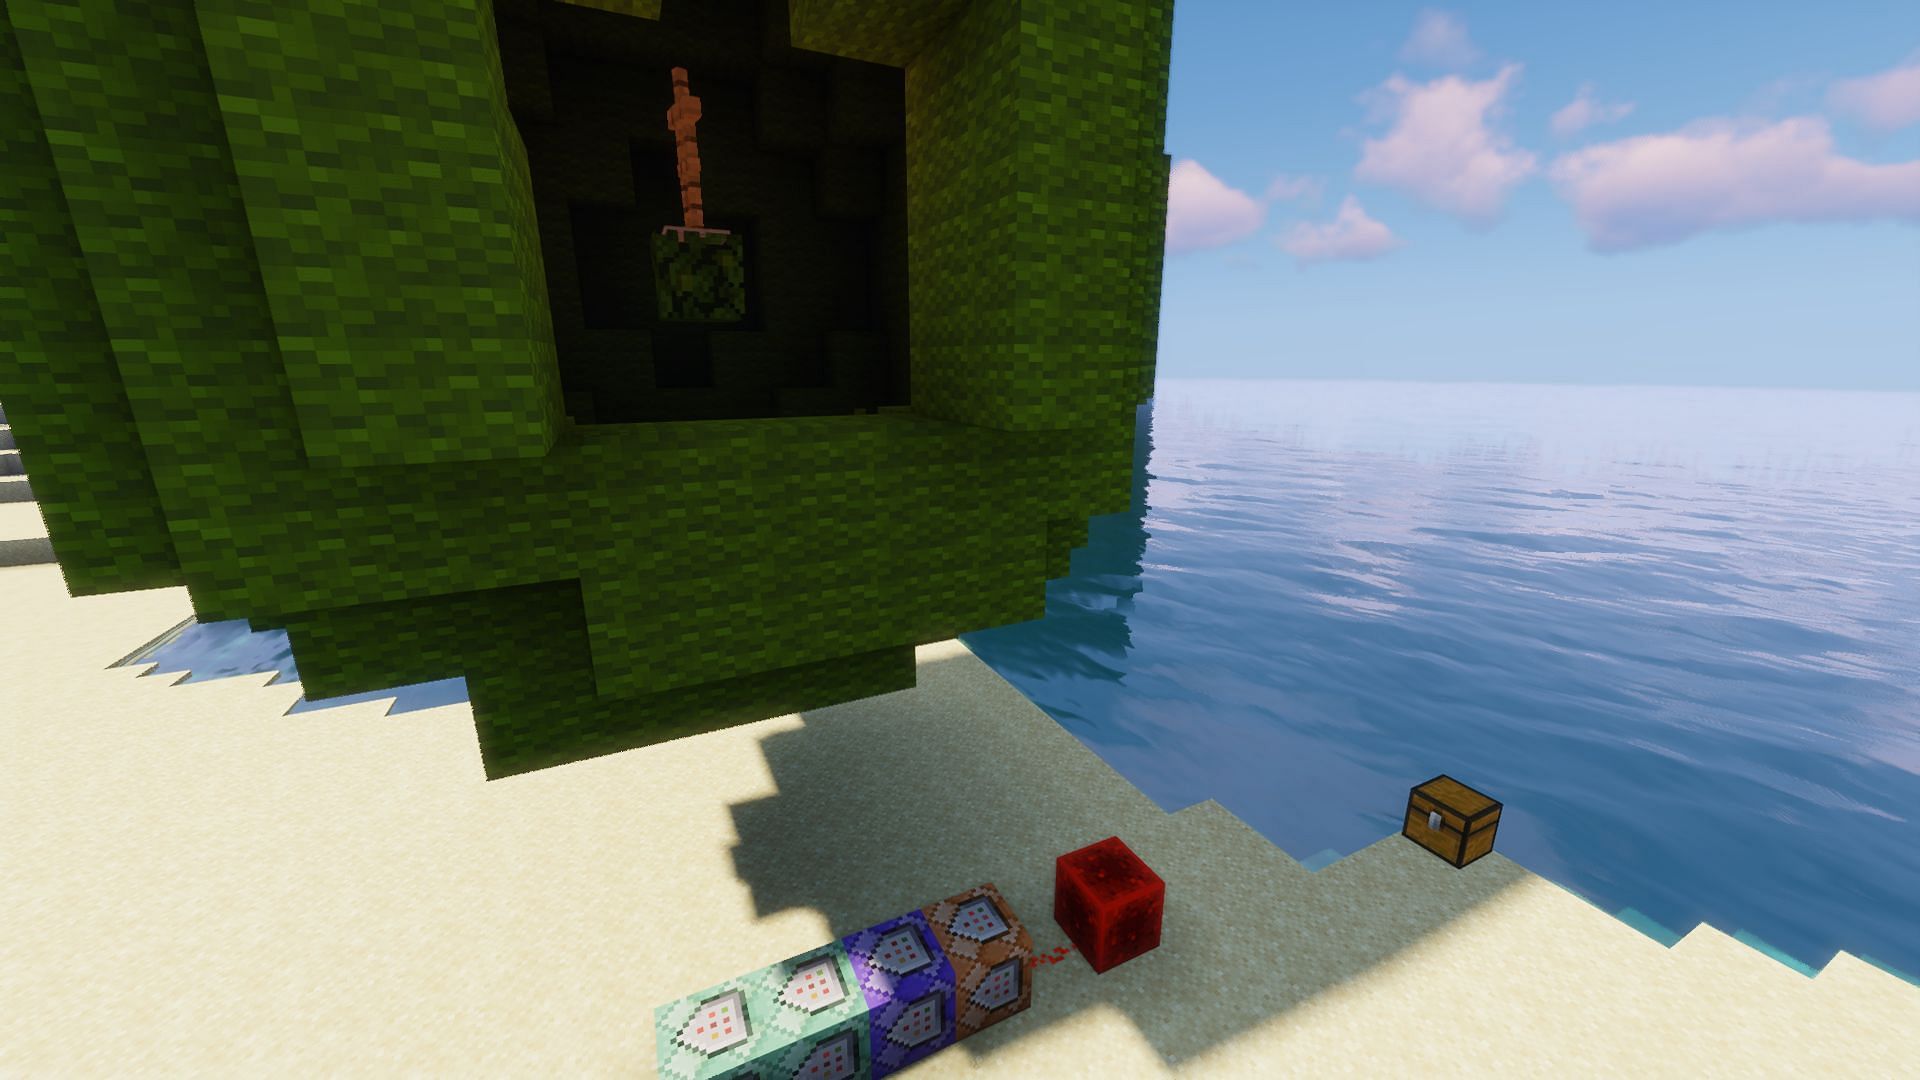 The command blocks being powered, rebuilding the sphere where it was broken (Image via Minecraft)